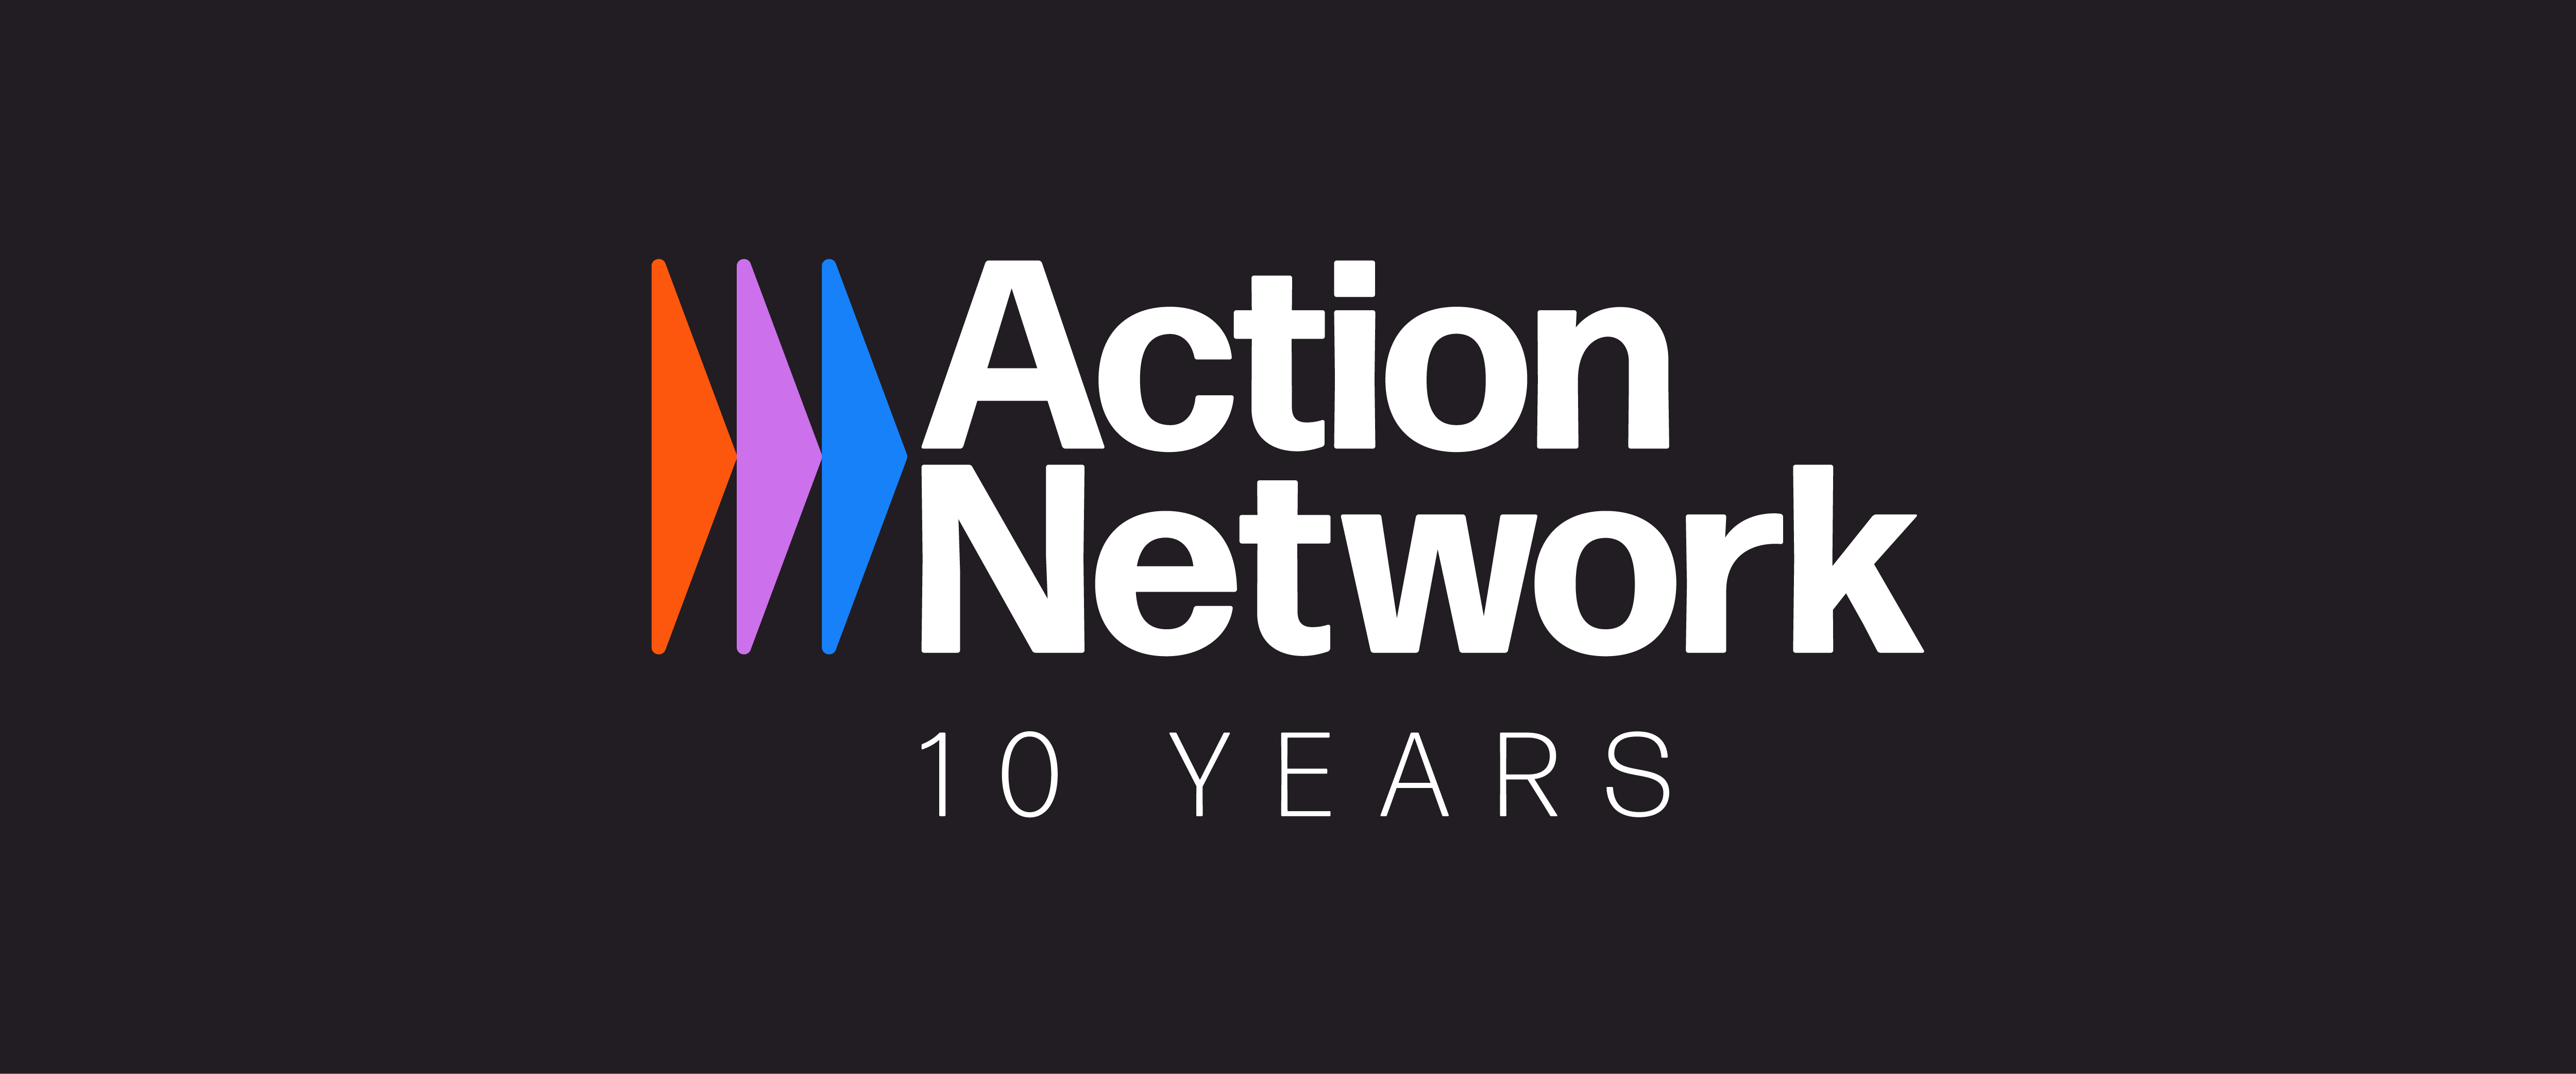 The 10-Year Anniversary version of the Action Network logo